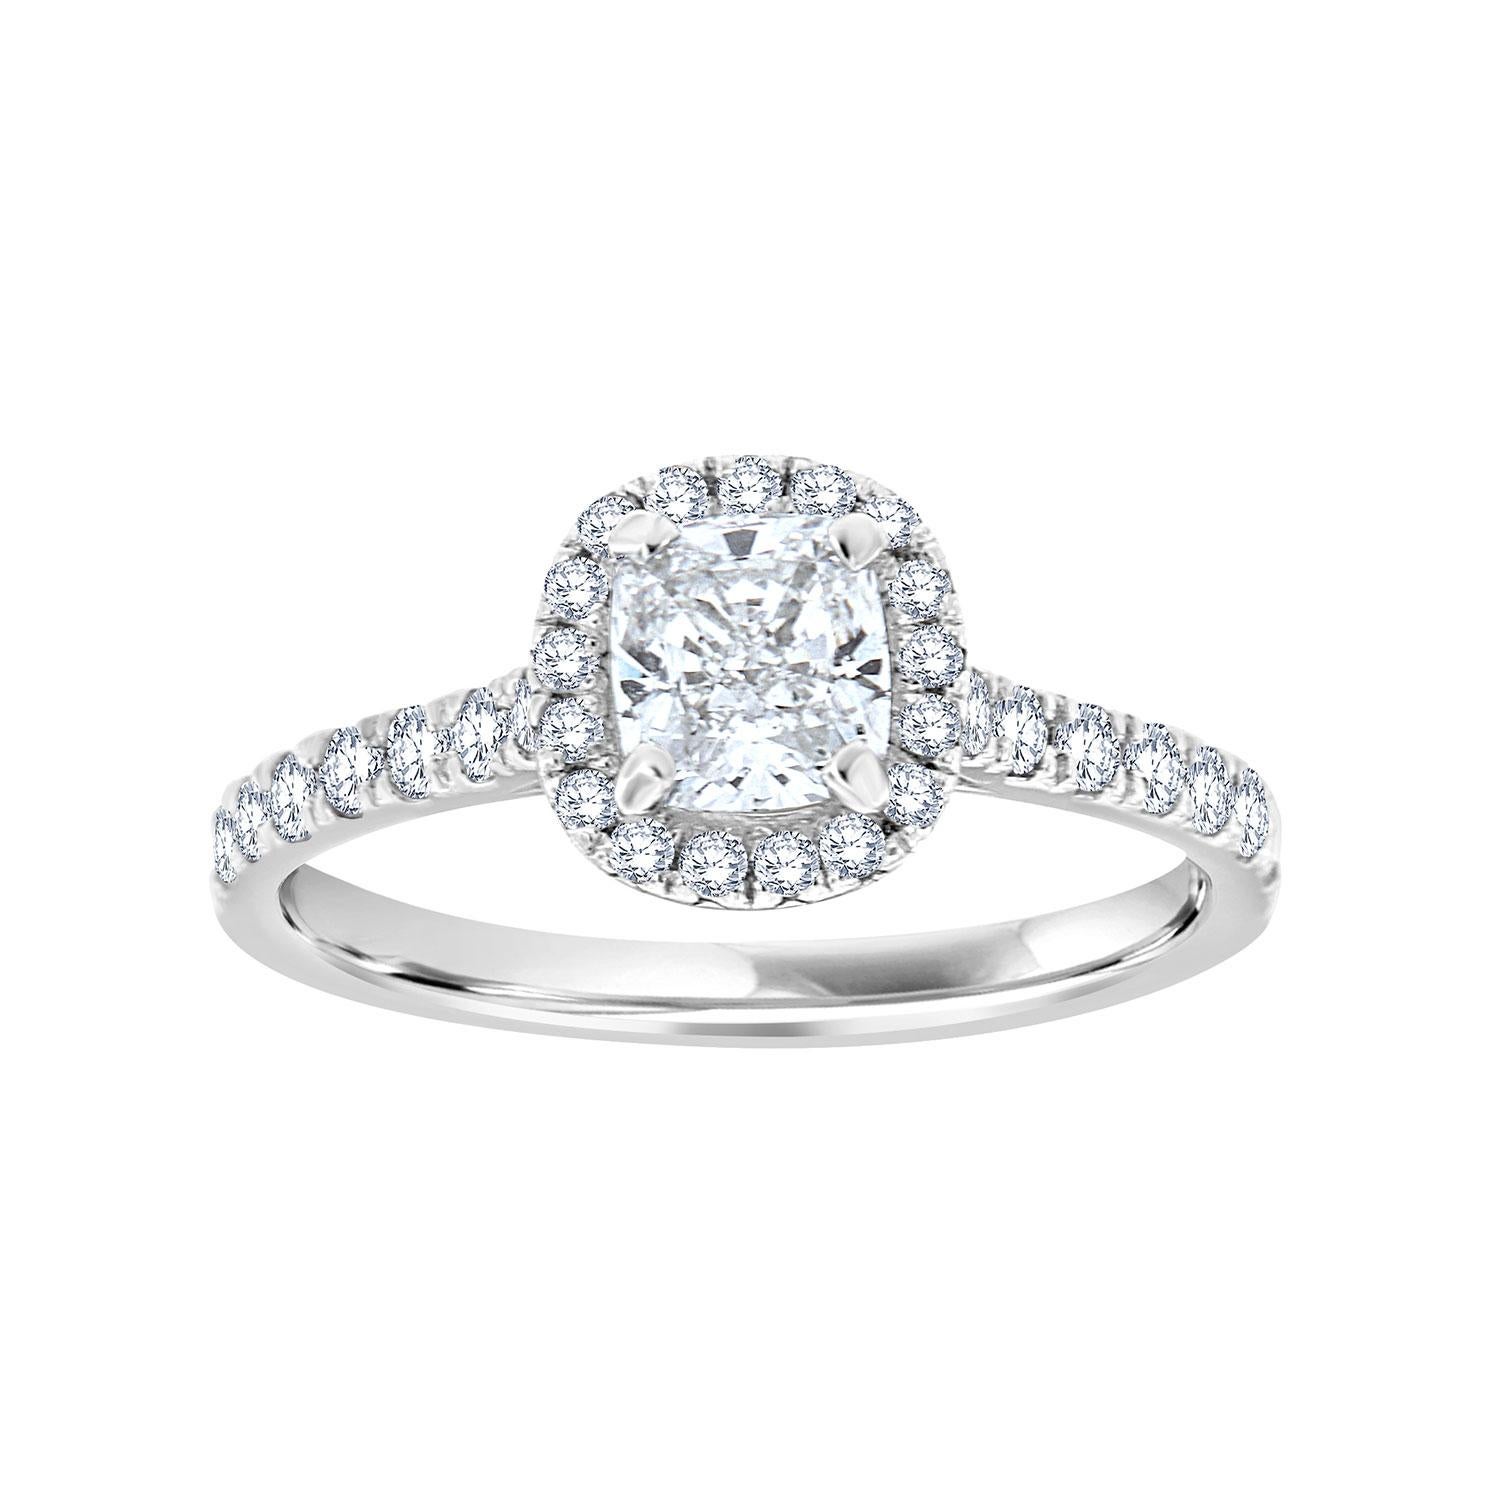 This Stunning Platinum ring set features a 0.81-Carat Cushion-shaped diamond H color and VS1 in clarity GIA Certificate 6382577288. The Center diamond is encircled by a delicate halo of diamonds on top of a 2.5mm Platinum band. Sixteen (16)